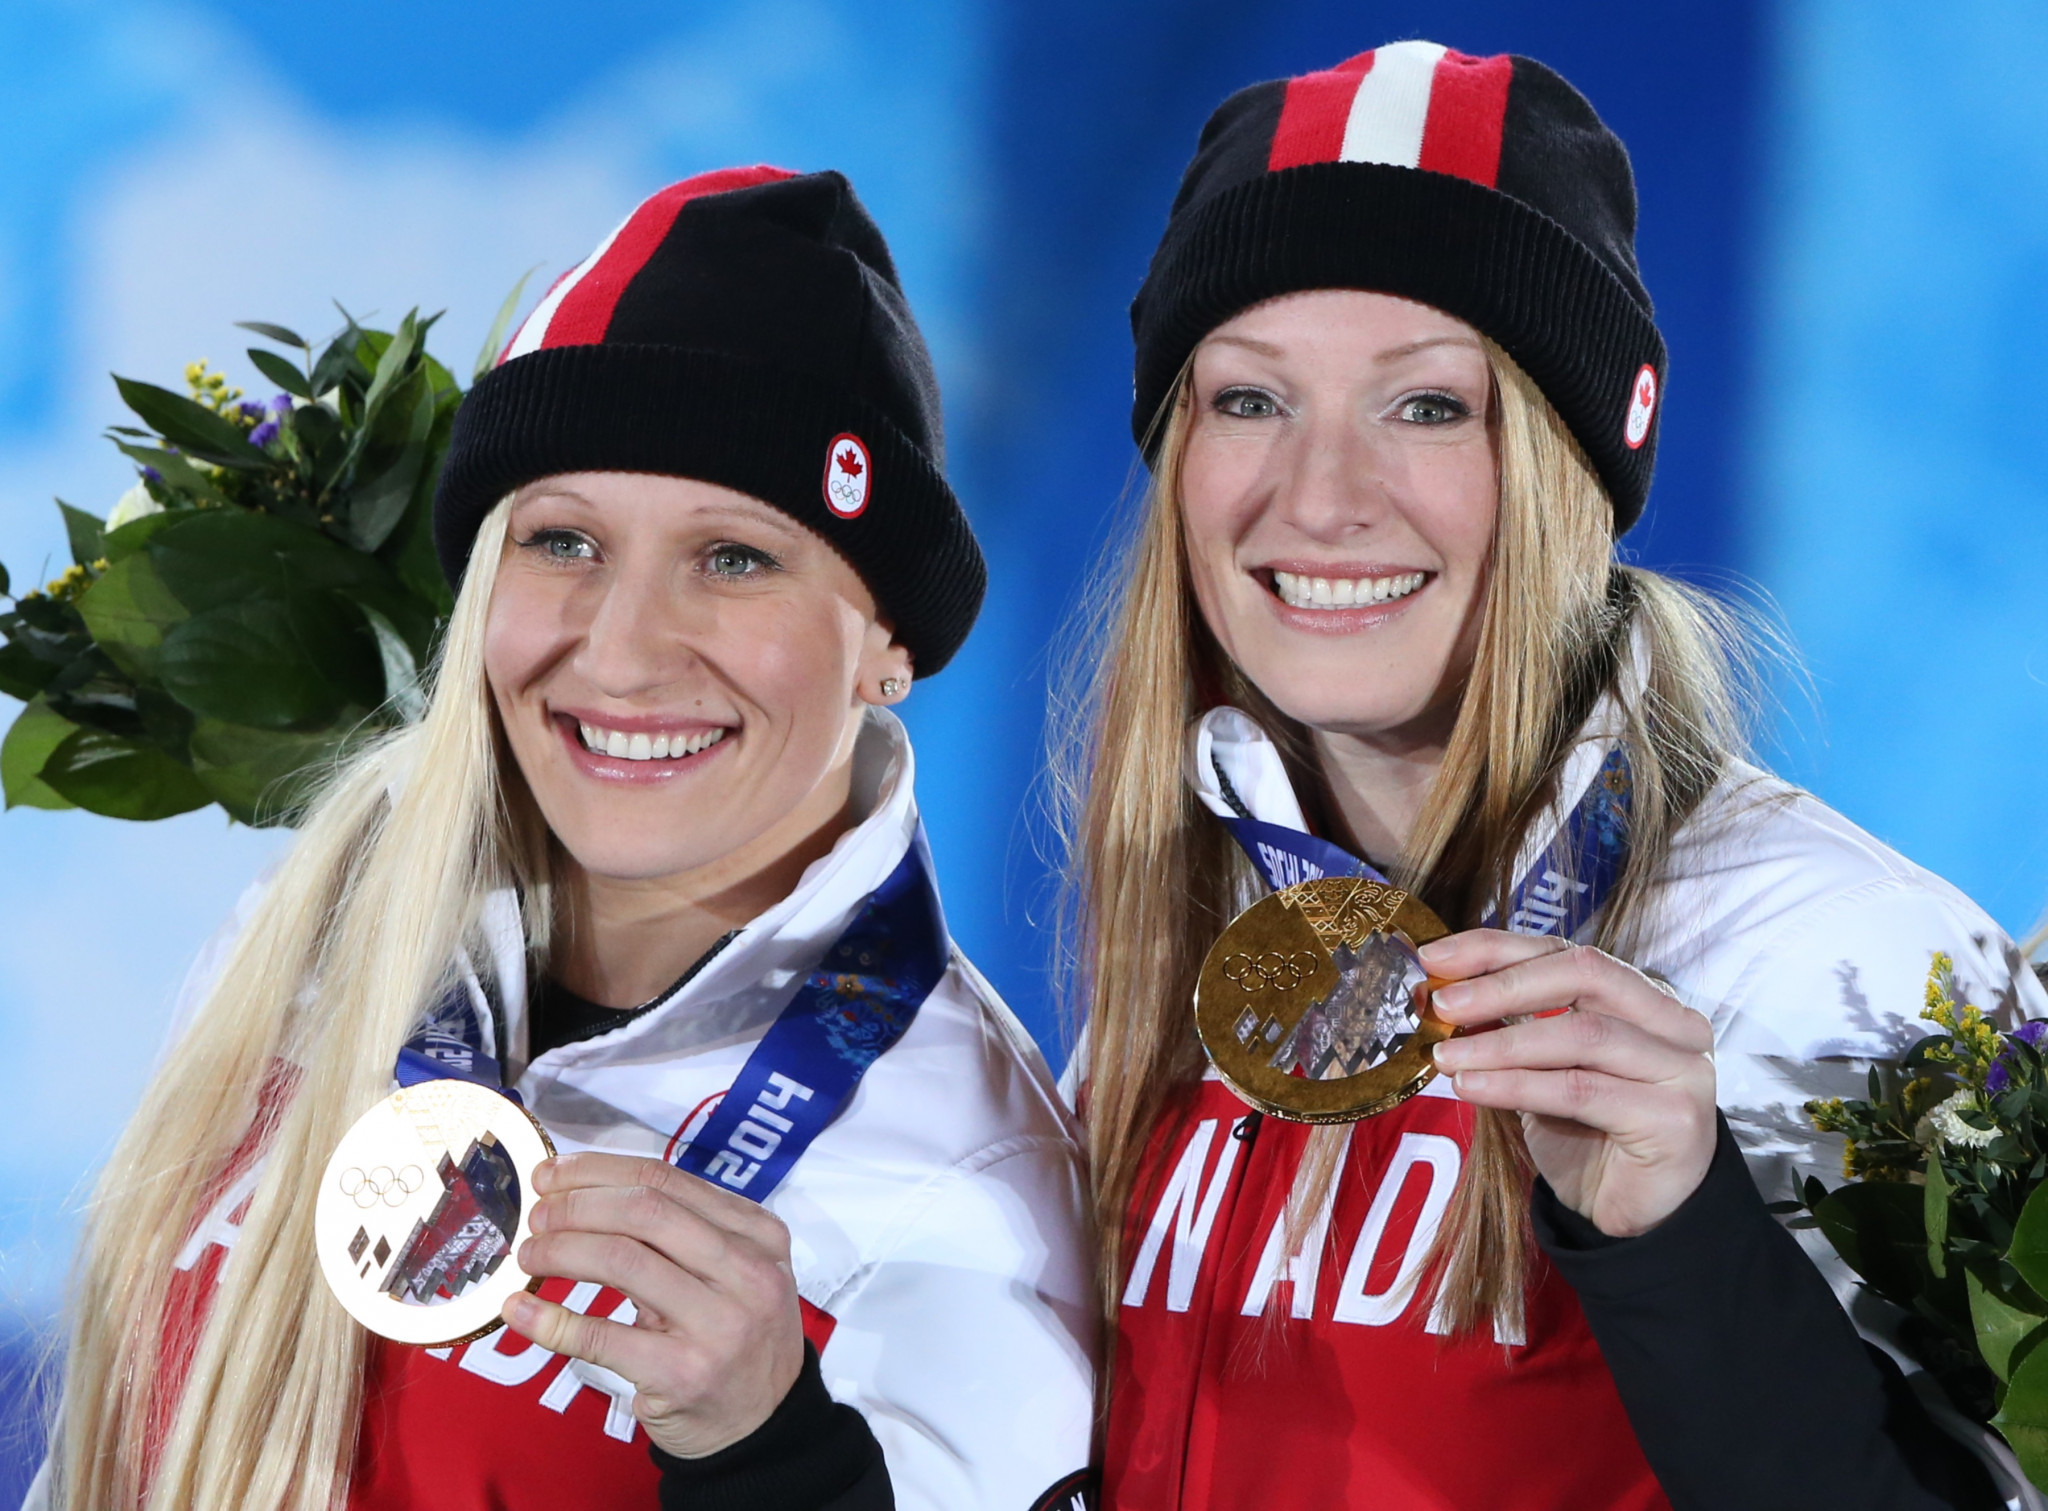 Kaillie Humphries, left, won two-person bobsleigh gold at the sochi 2014 Winter Olympics ©Getty Images